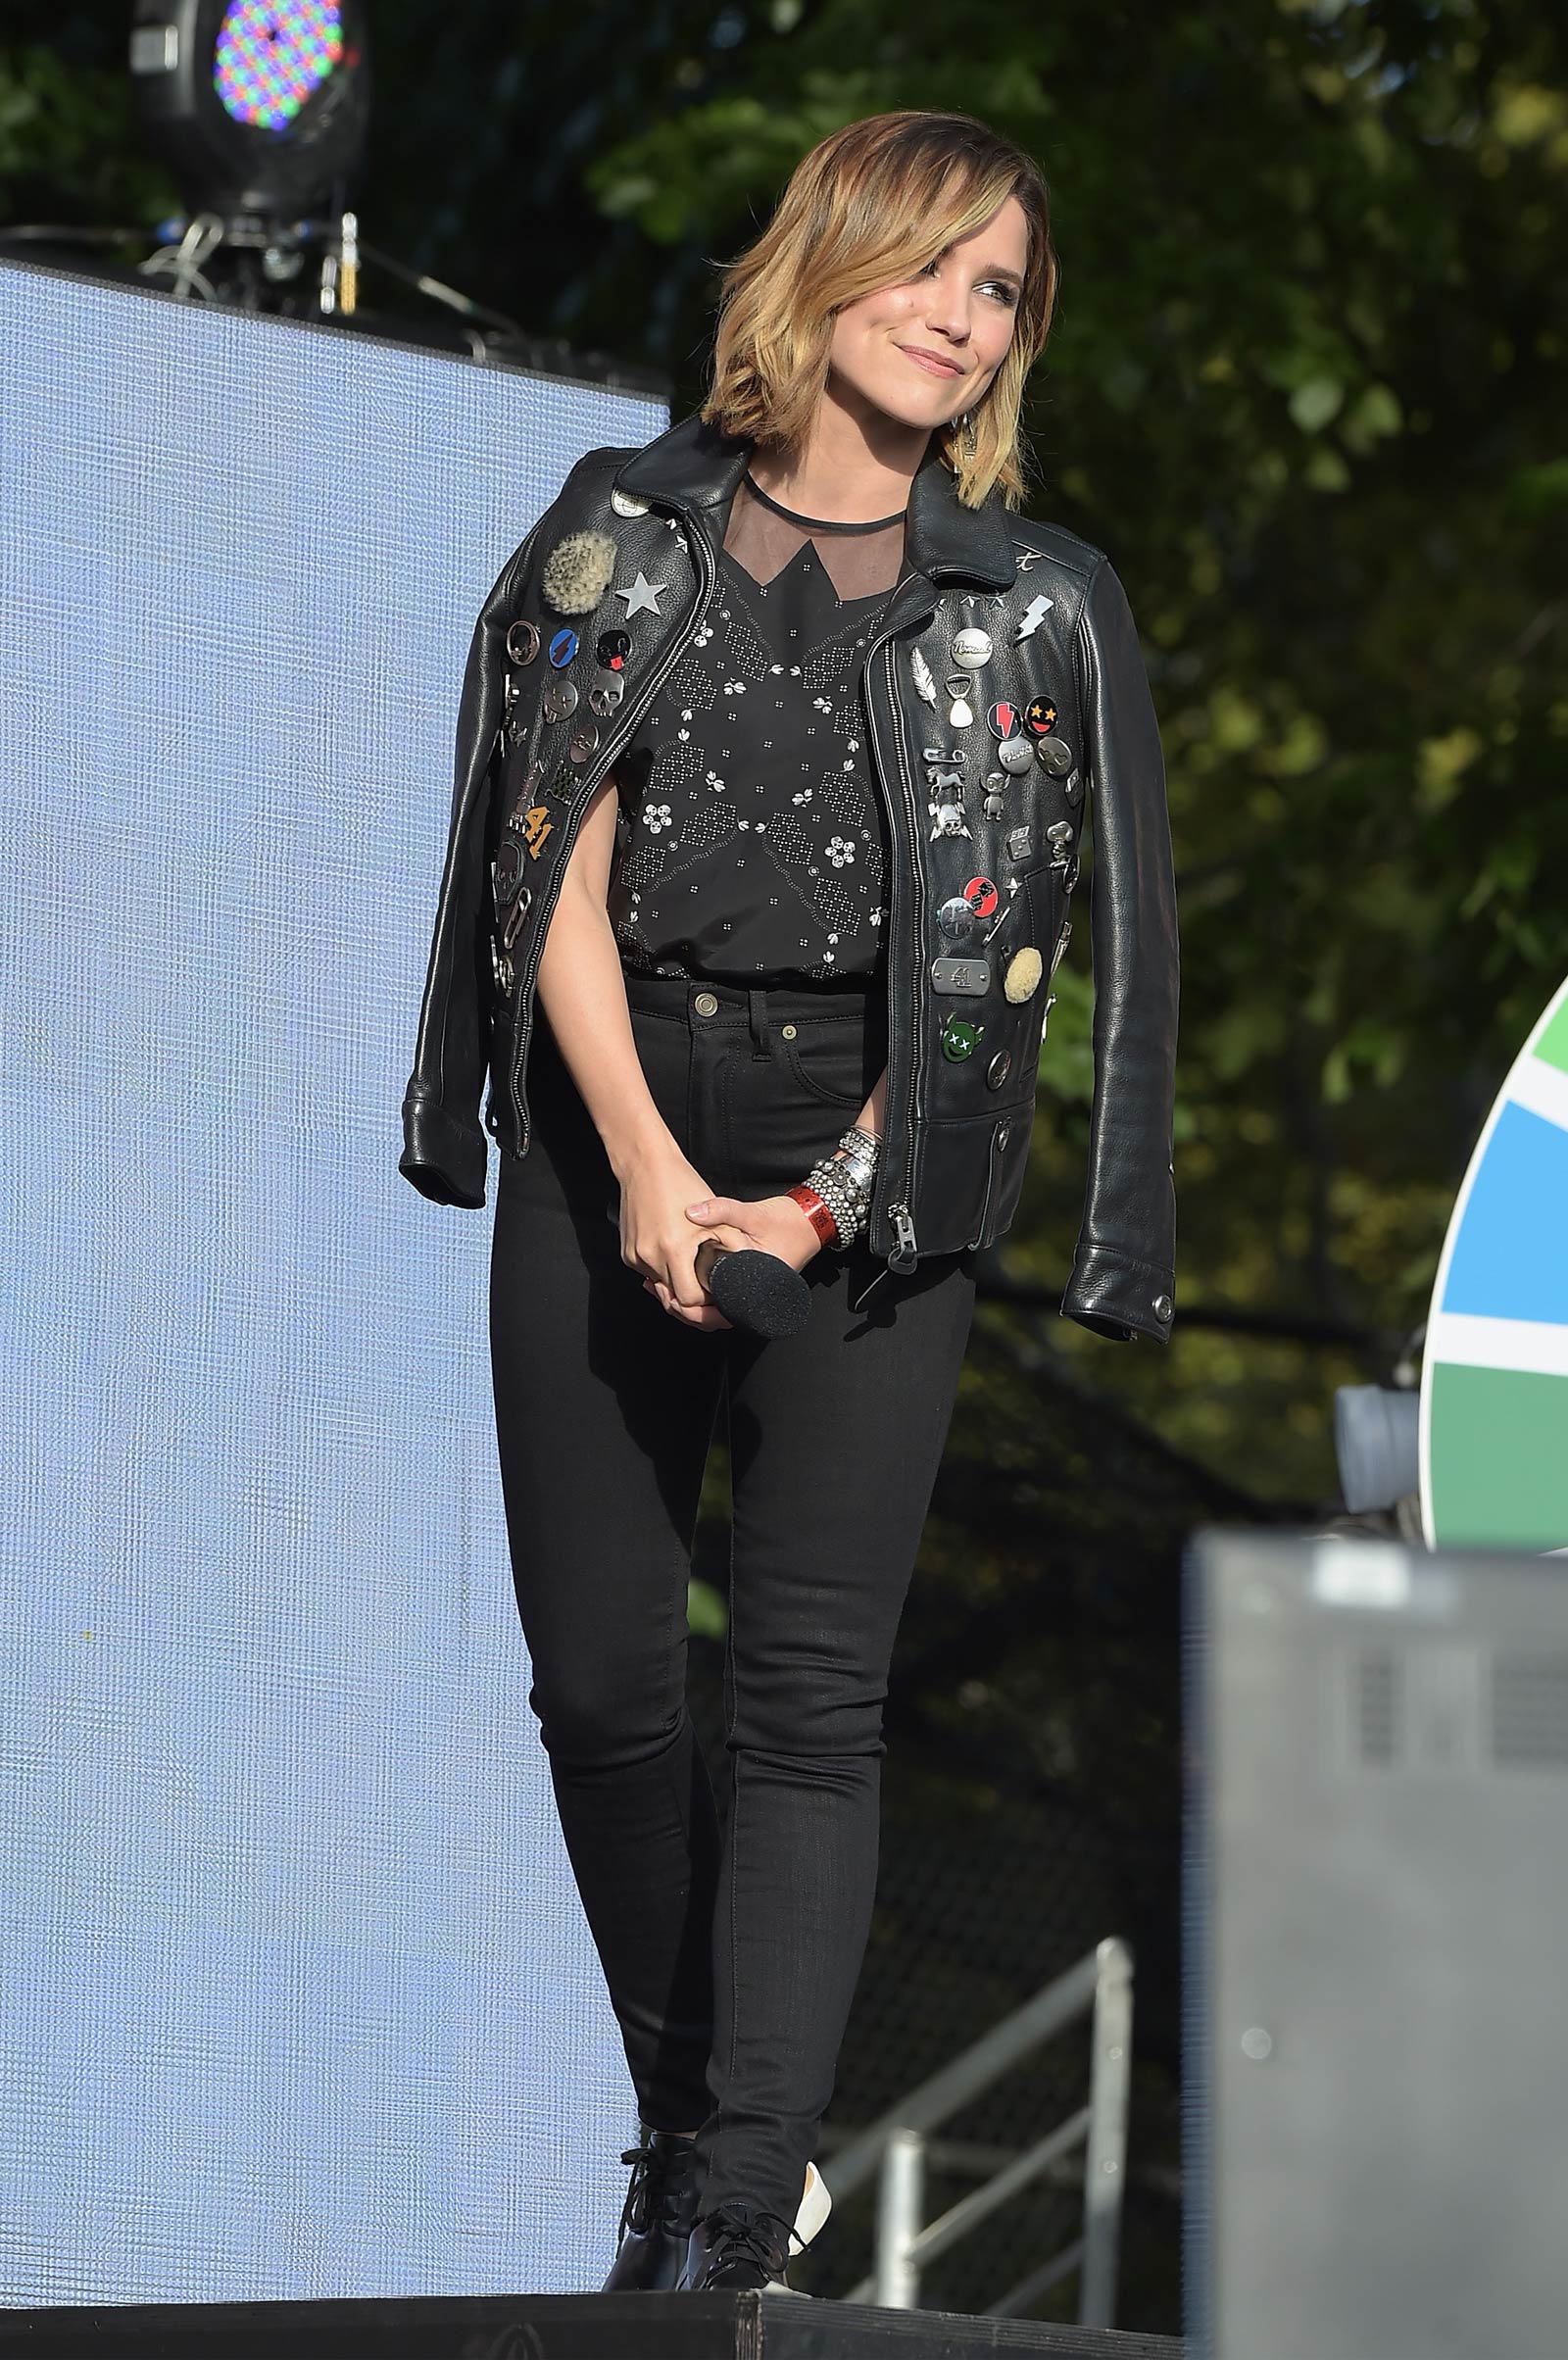 Sophia Bush & Olivia Wilde attend 2015 Global Citizen Festival to end extreme poverty by 2030